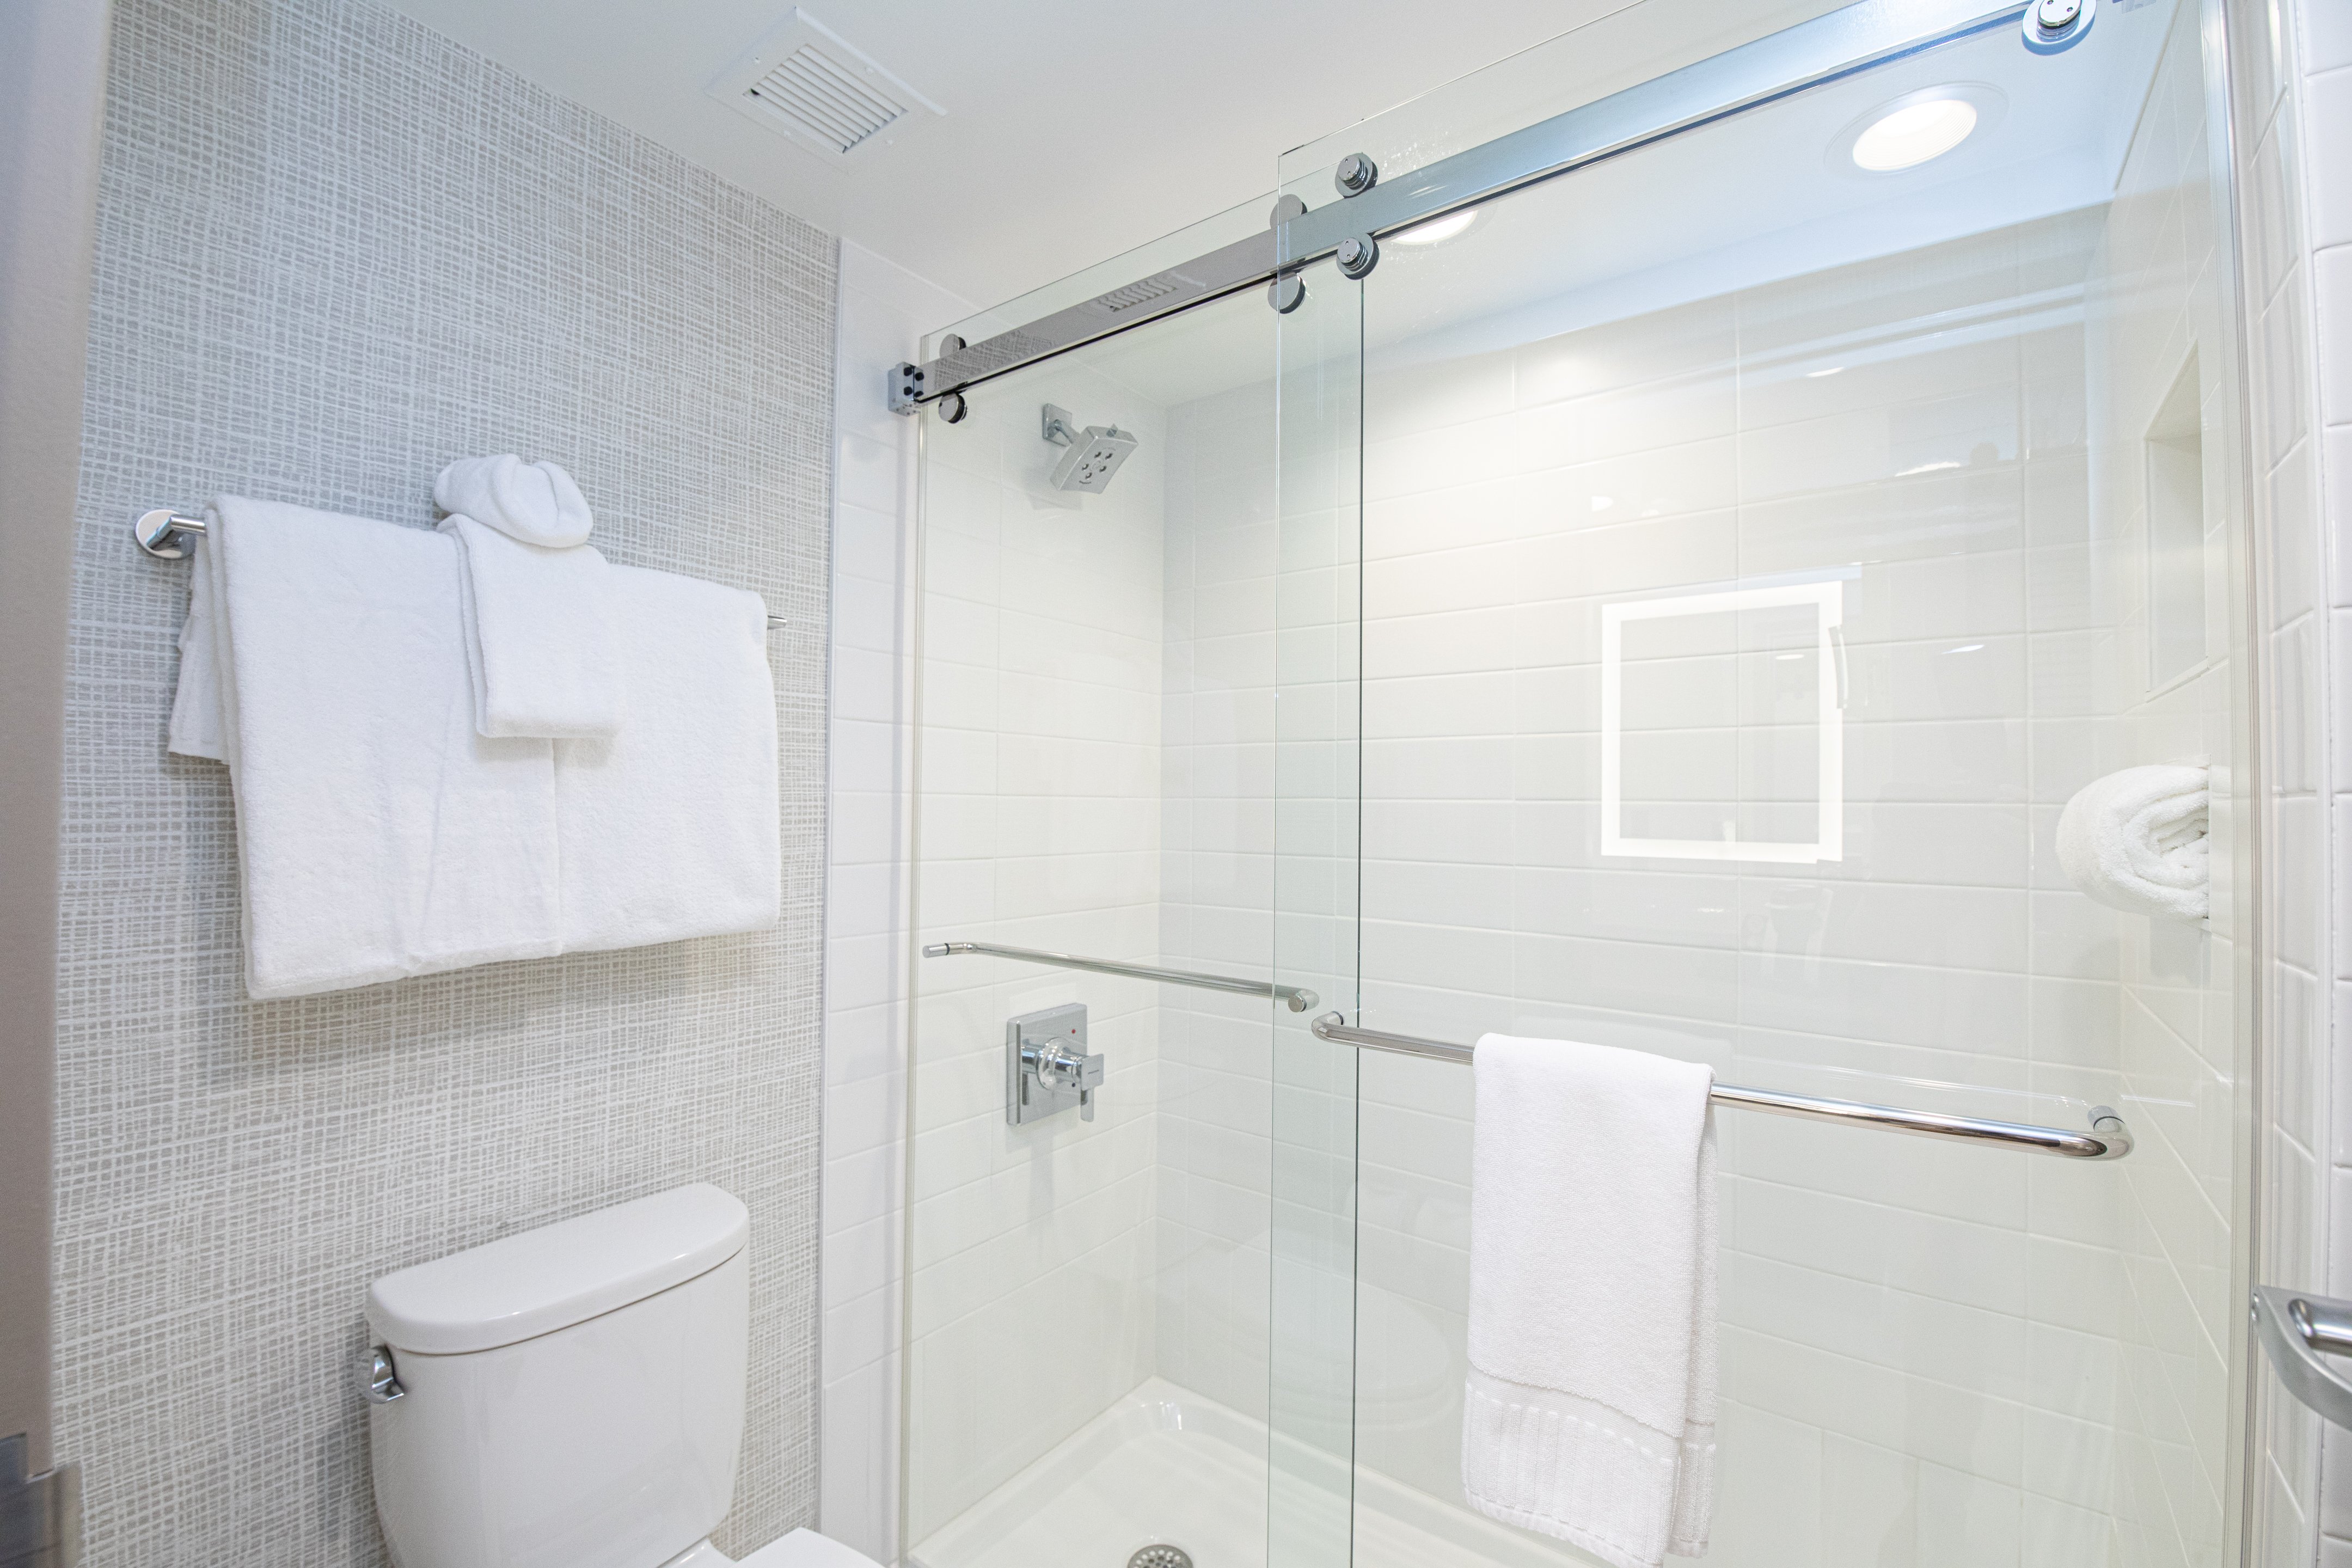 Freshen yourself up with our clean, accessible guest bathroom.